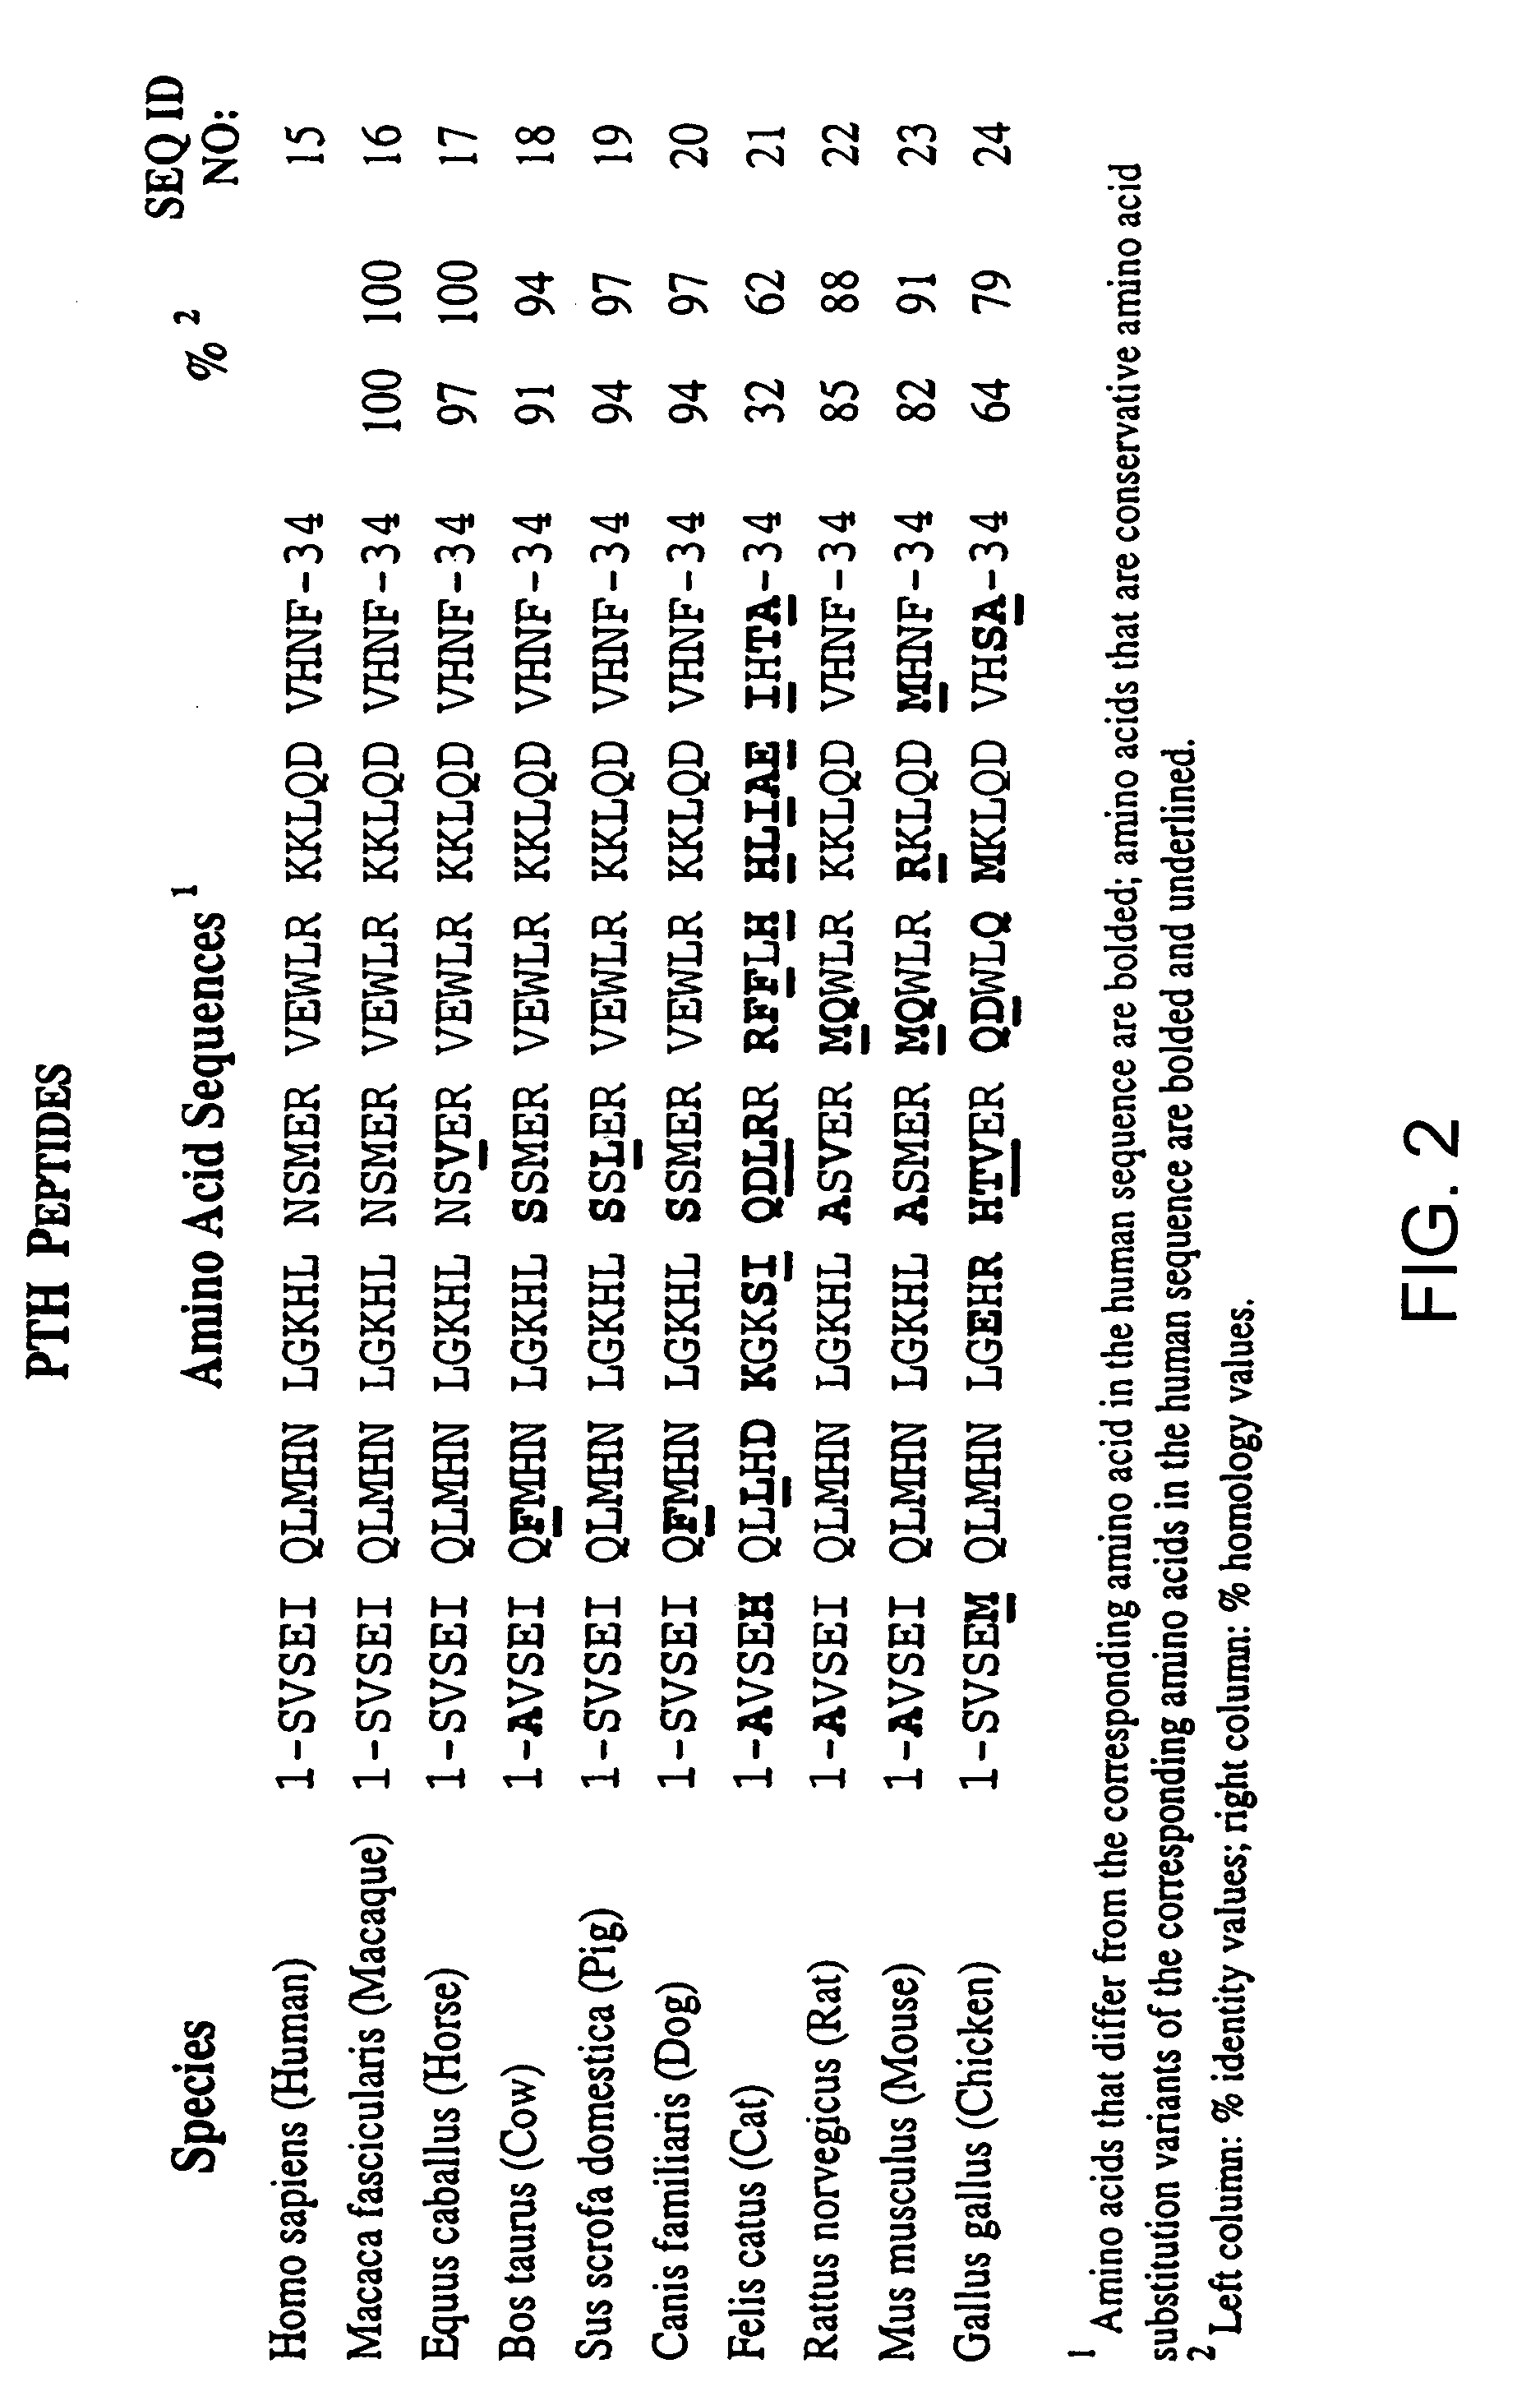 Treatment of bone disorders with skeletal anabolic drugs